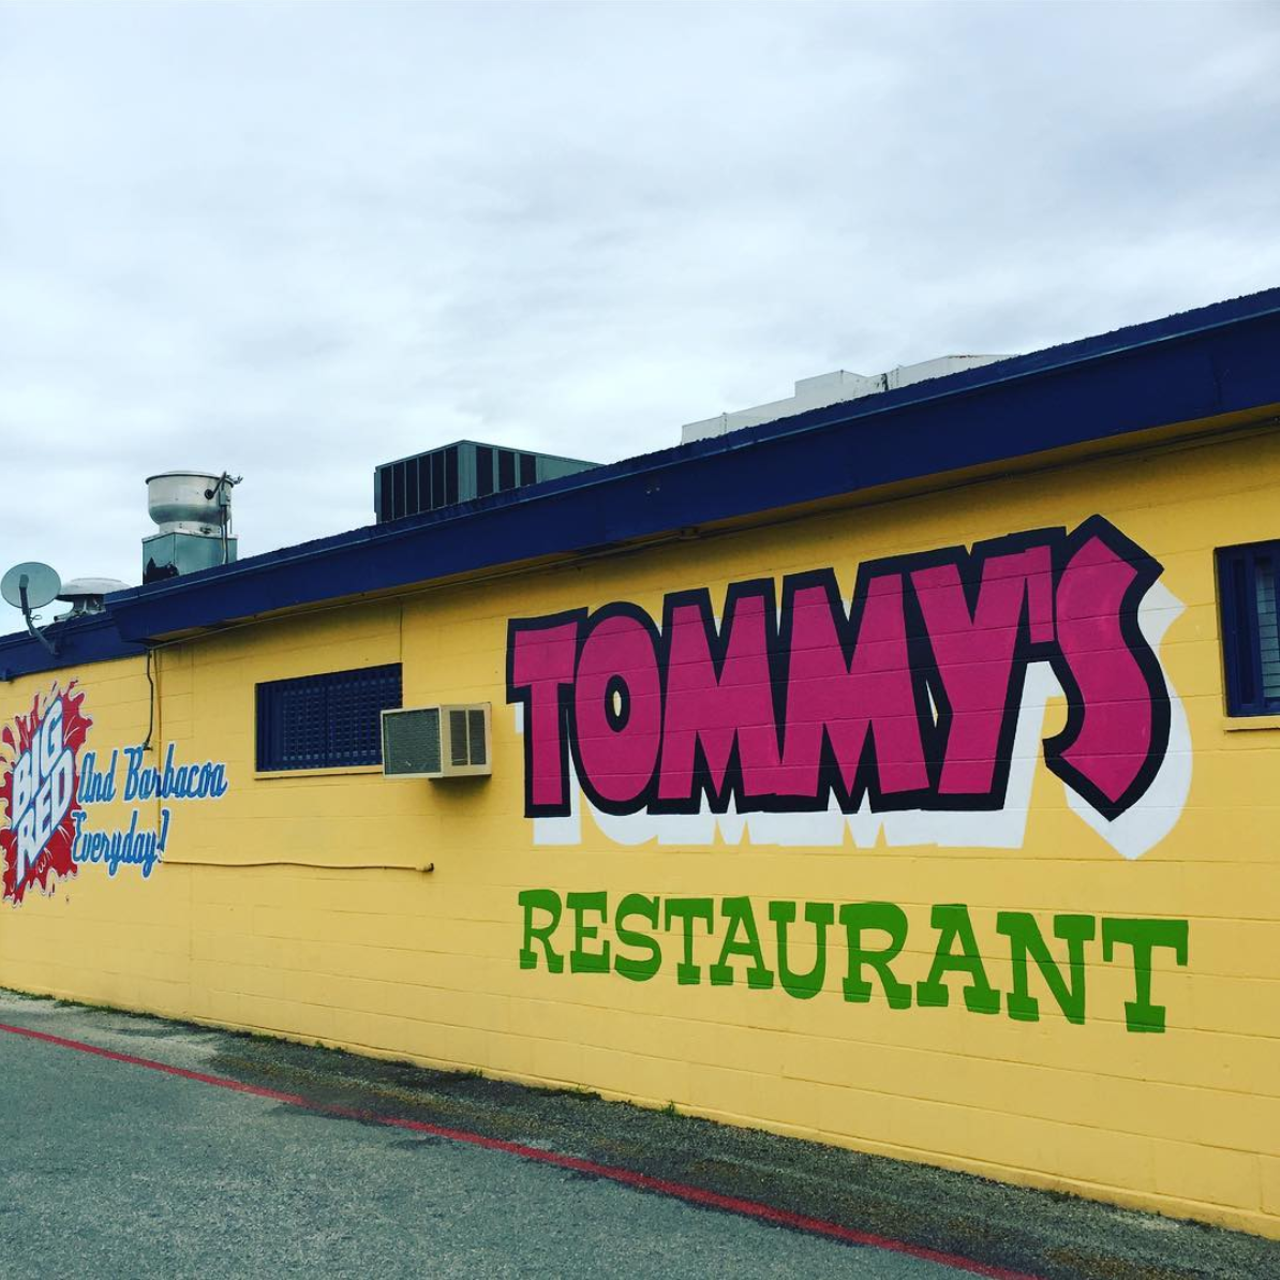 Tommy’s Restaurant
Multiple locations, mytommys.com
If you’re looking for a quick and easy dining experience, any of the three San Antonio locations will satisfy you. With breakfast served all day and fideo & menudo that long-time fans rave about, you’re missing out if you haven’t tried Tommy’s.
Photo via Instagram / 363elsa